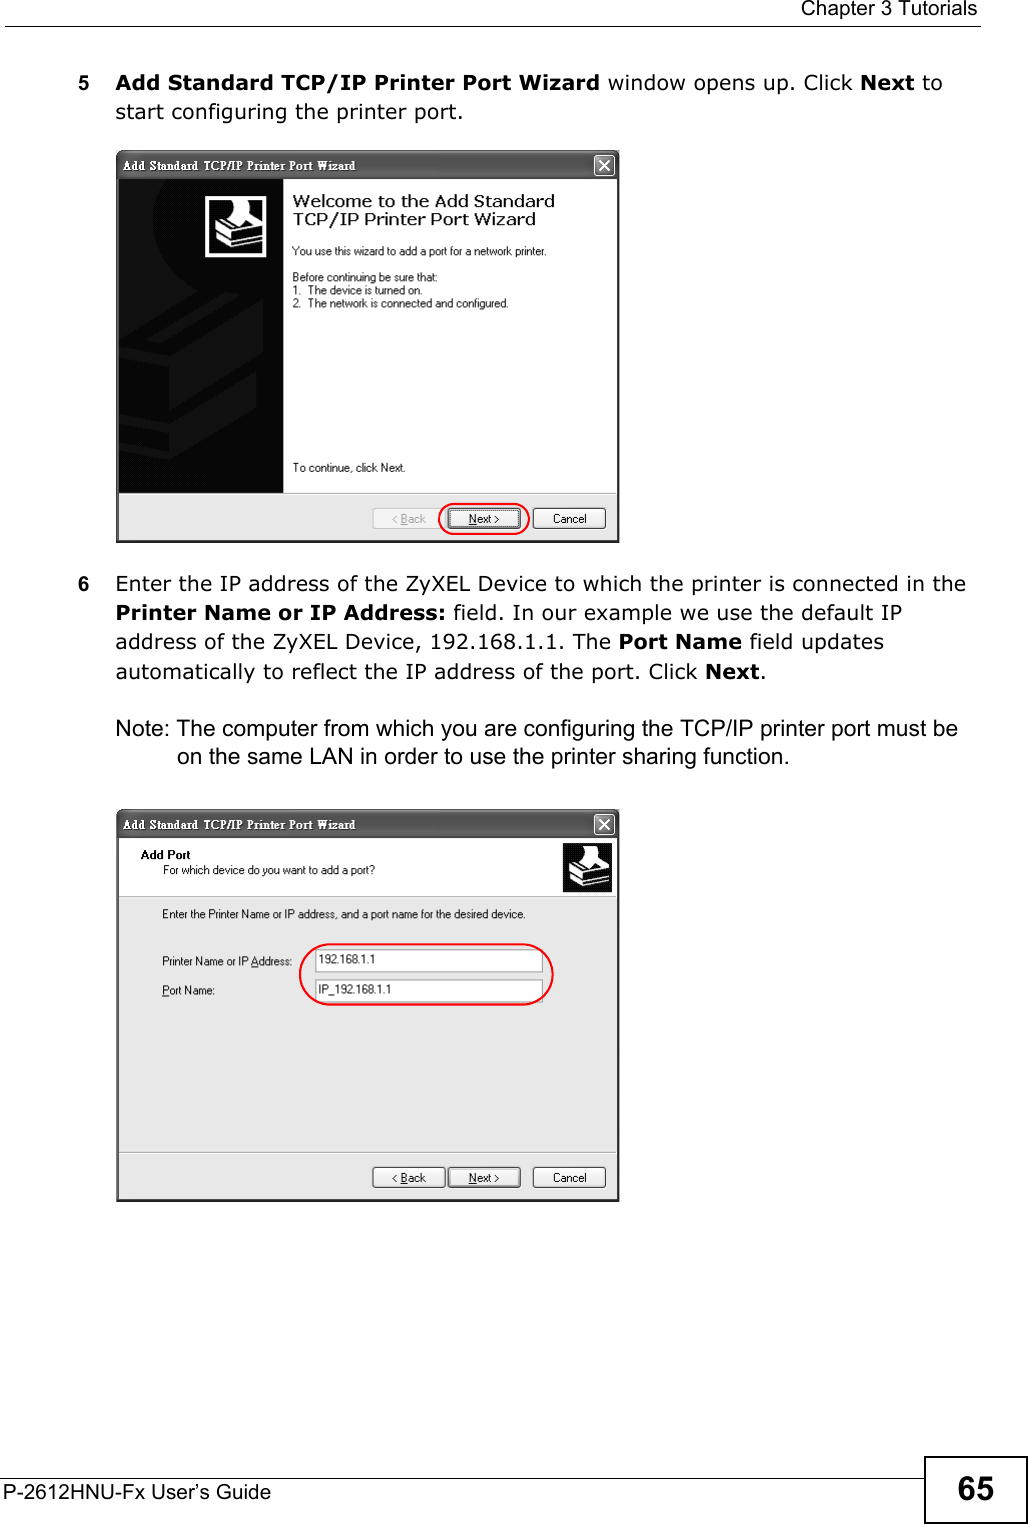  Chapter 3 TutorialsP-2612HNU-Fx User’s Guide 655Add Standard TCP/IP Printer Port Wizard window opens up. Click Next to start configuring the printer port.Tutorial: Add a Port Wizard6Enter the IP address of the ZyXEL Device to which the printer is connected in the Printer Name or IP Address: field. In our example we use the default IP address of the ZyXEL Device, 192.168.1.1. The Port Name field updatesautomatically to reflect the IP address of the port. Click Next.Note: The computer from which you are configuring the TCP/IP printer port must beon the same LAN in order to use the printer sharing function.Tutorial: Enter IP Address of the ZyXEL De vice